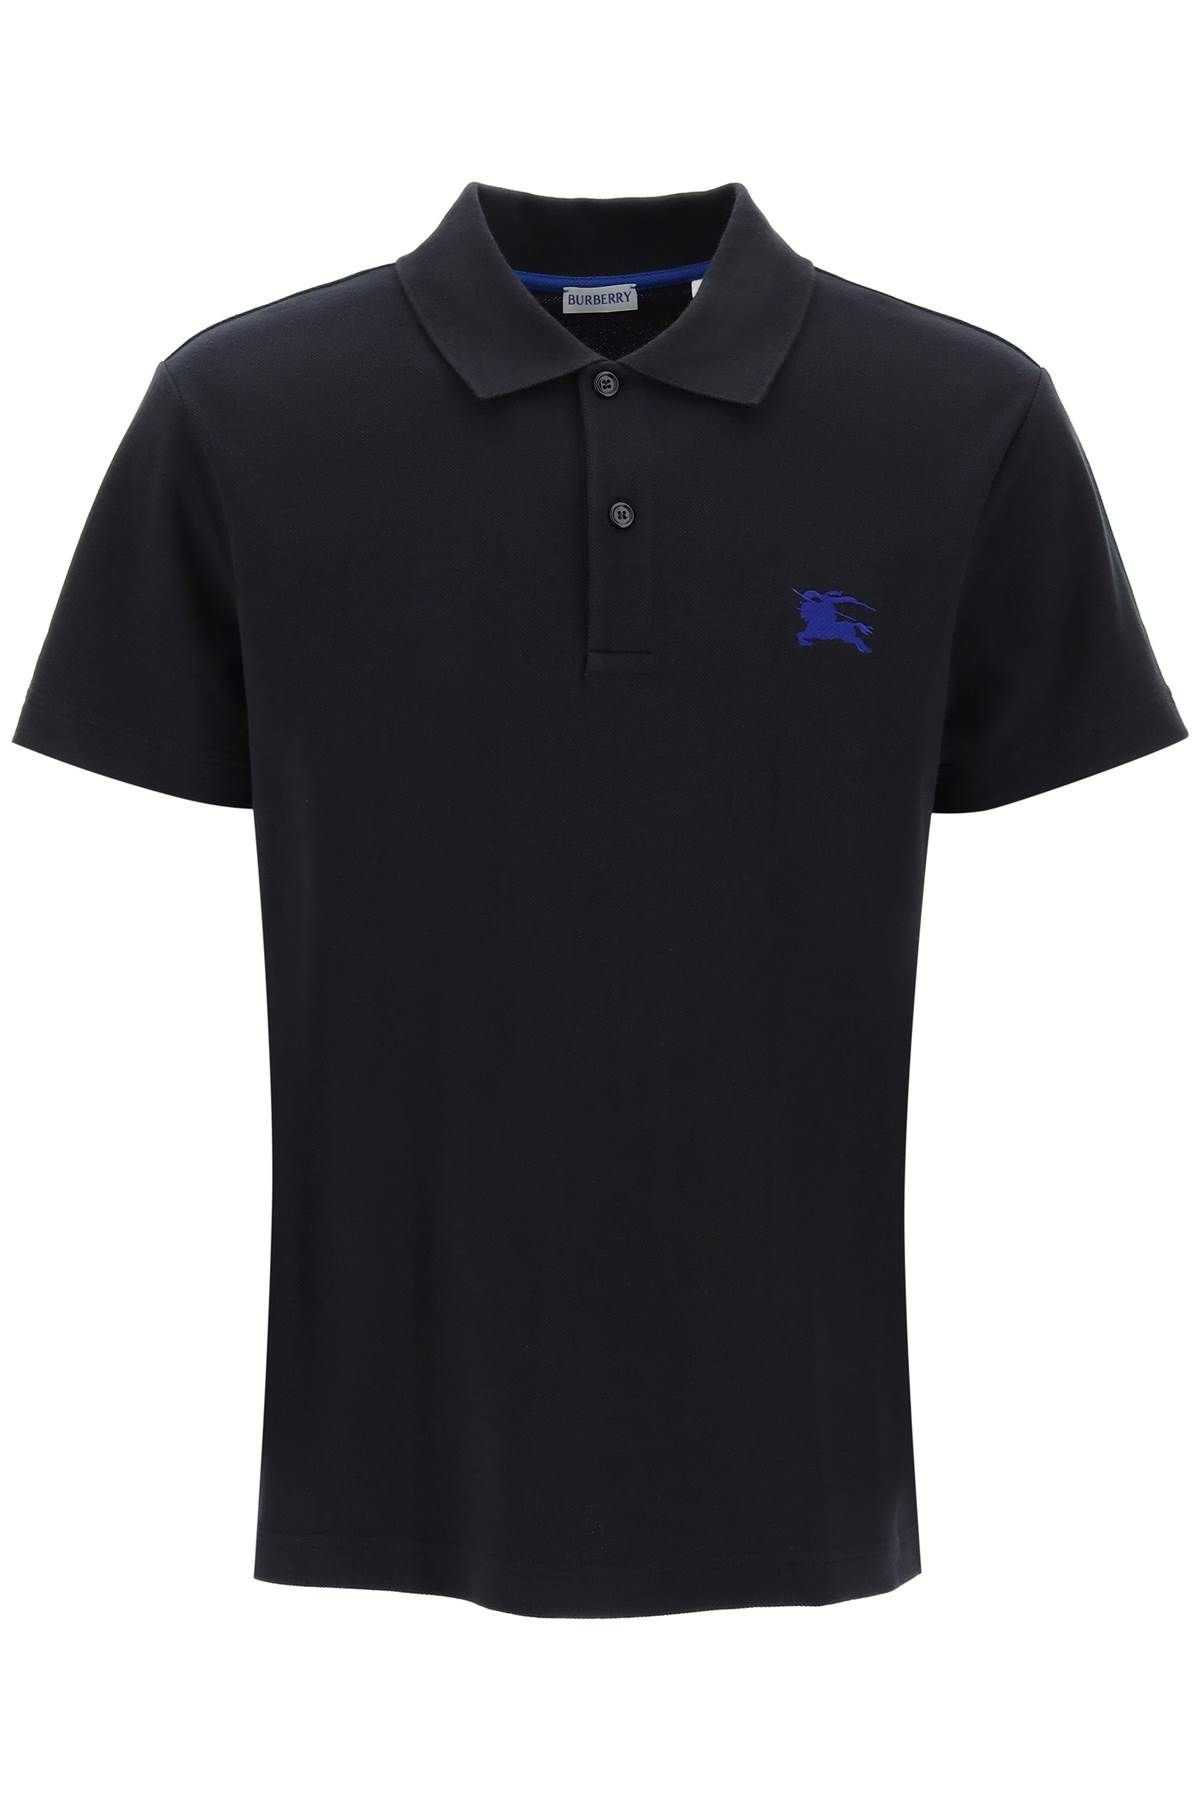 Burberry BURBERRY pique polo shirt with embroidered ekd